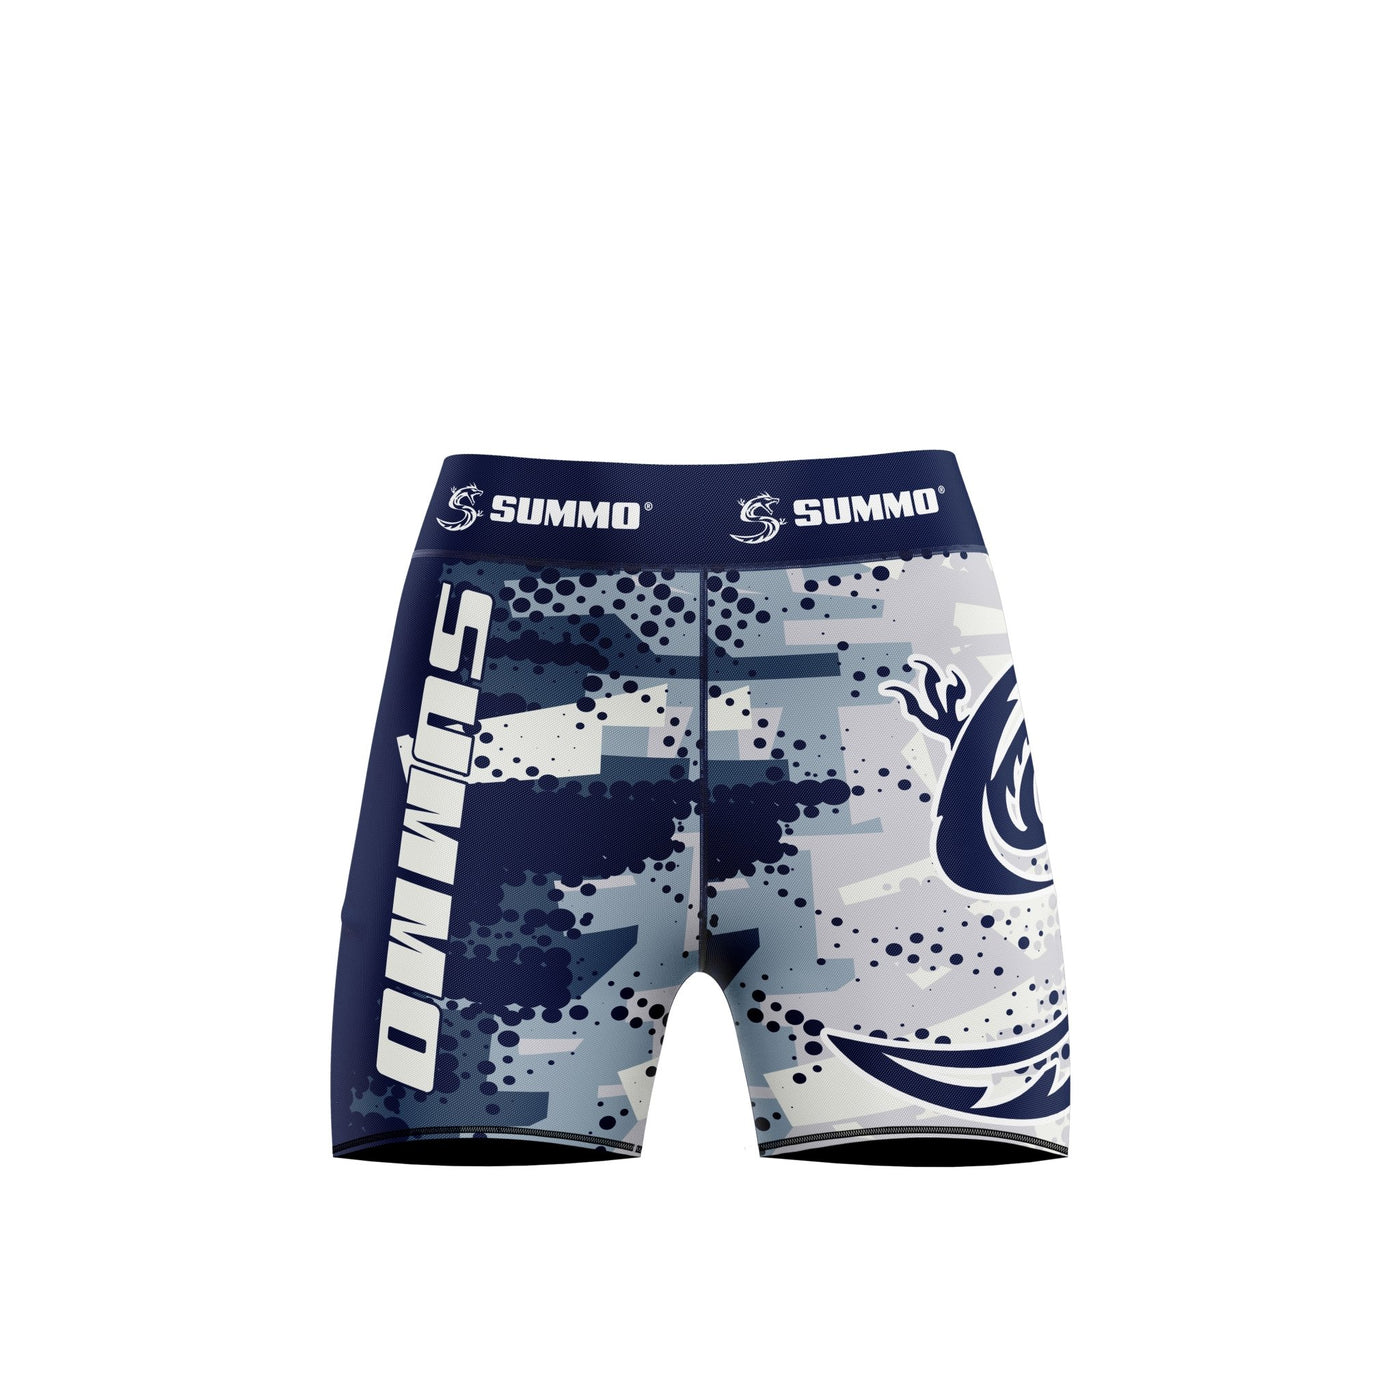 Oceanic Compression Shorts - Summo Sports